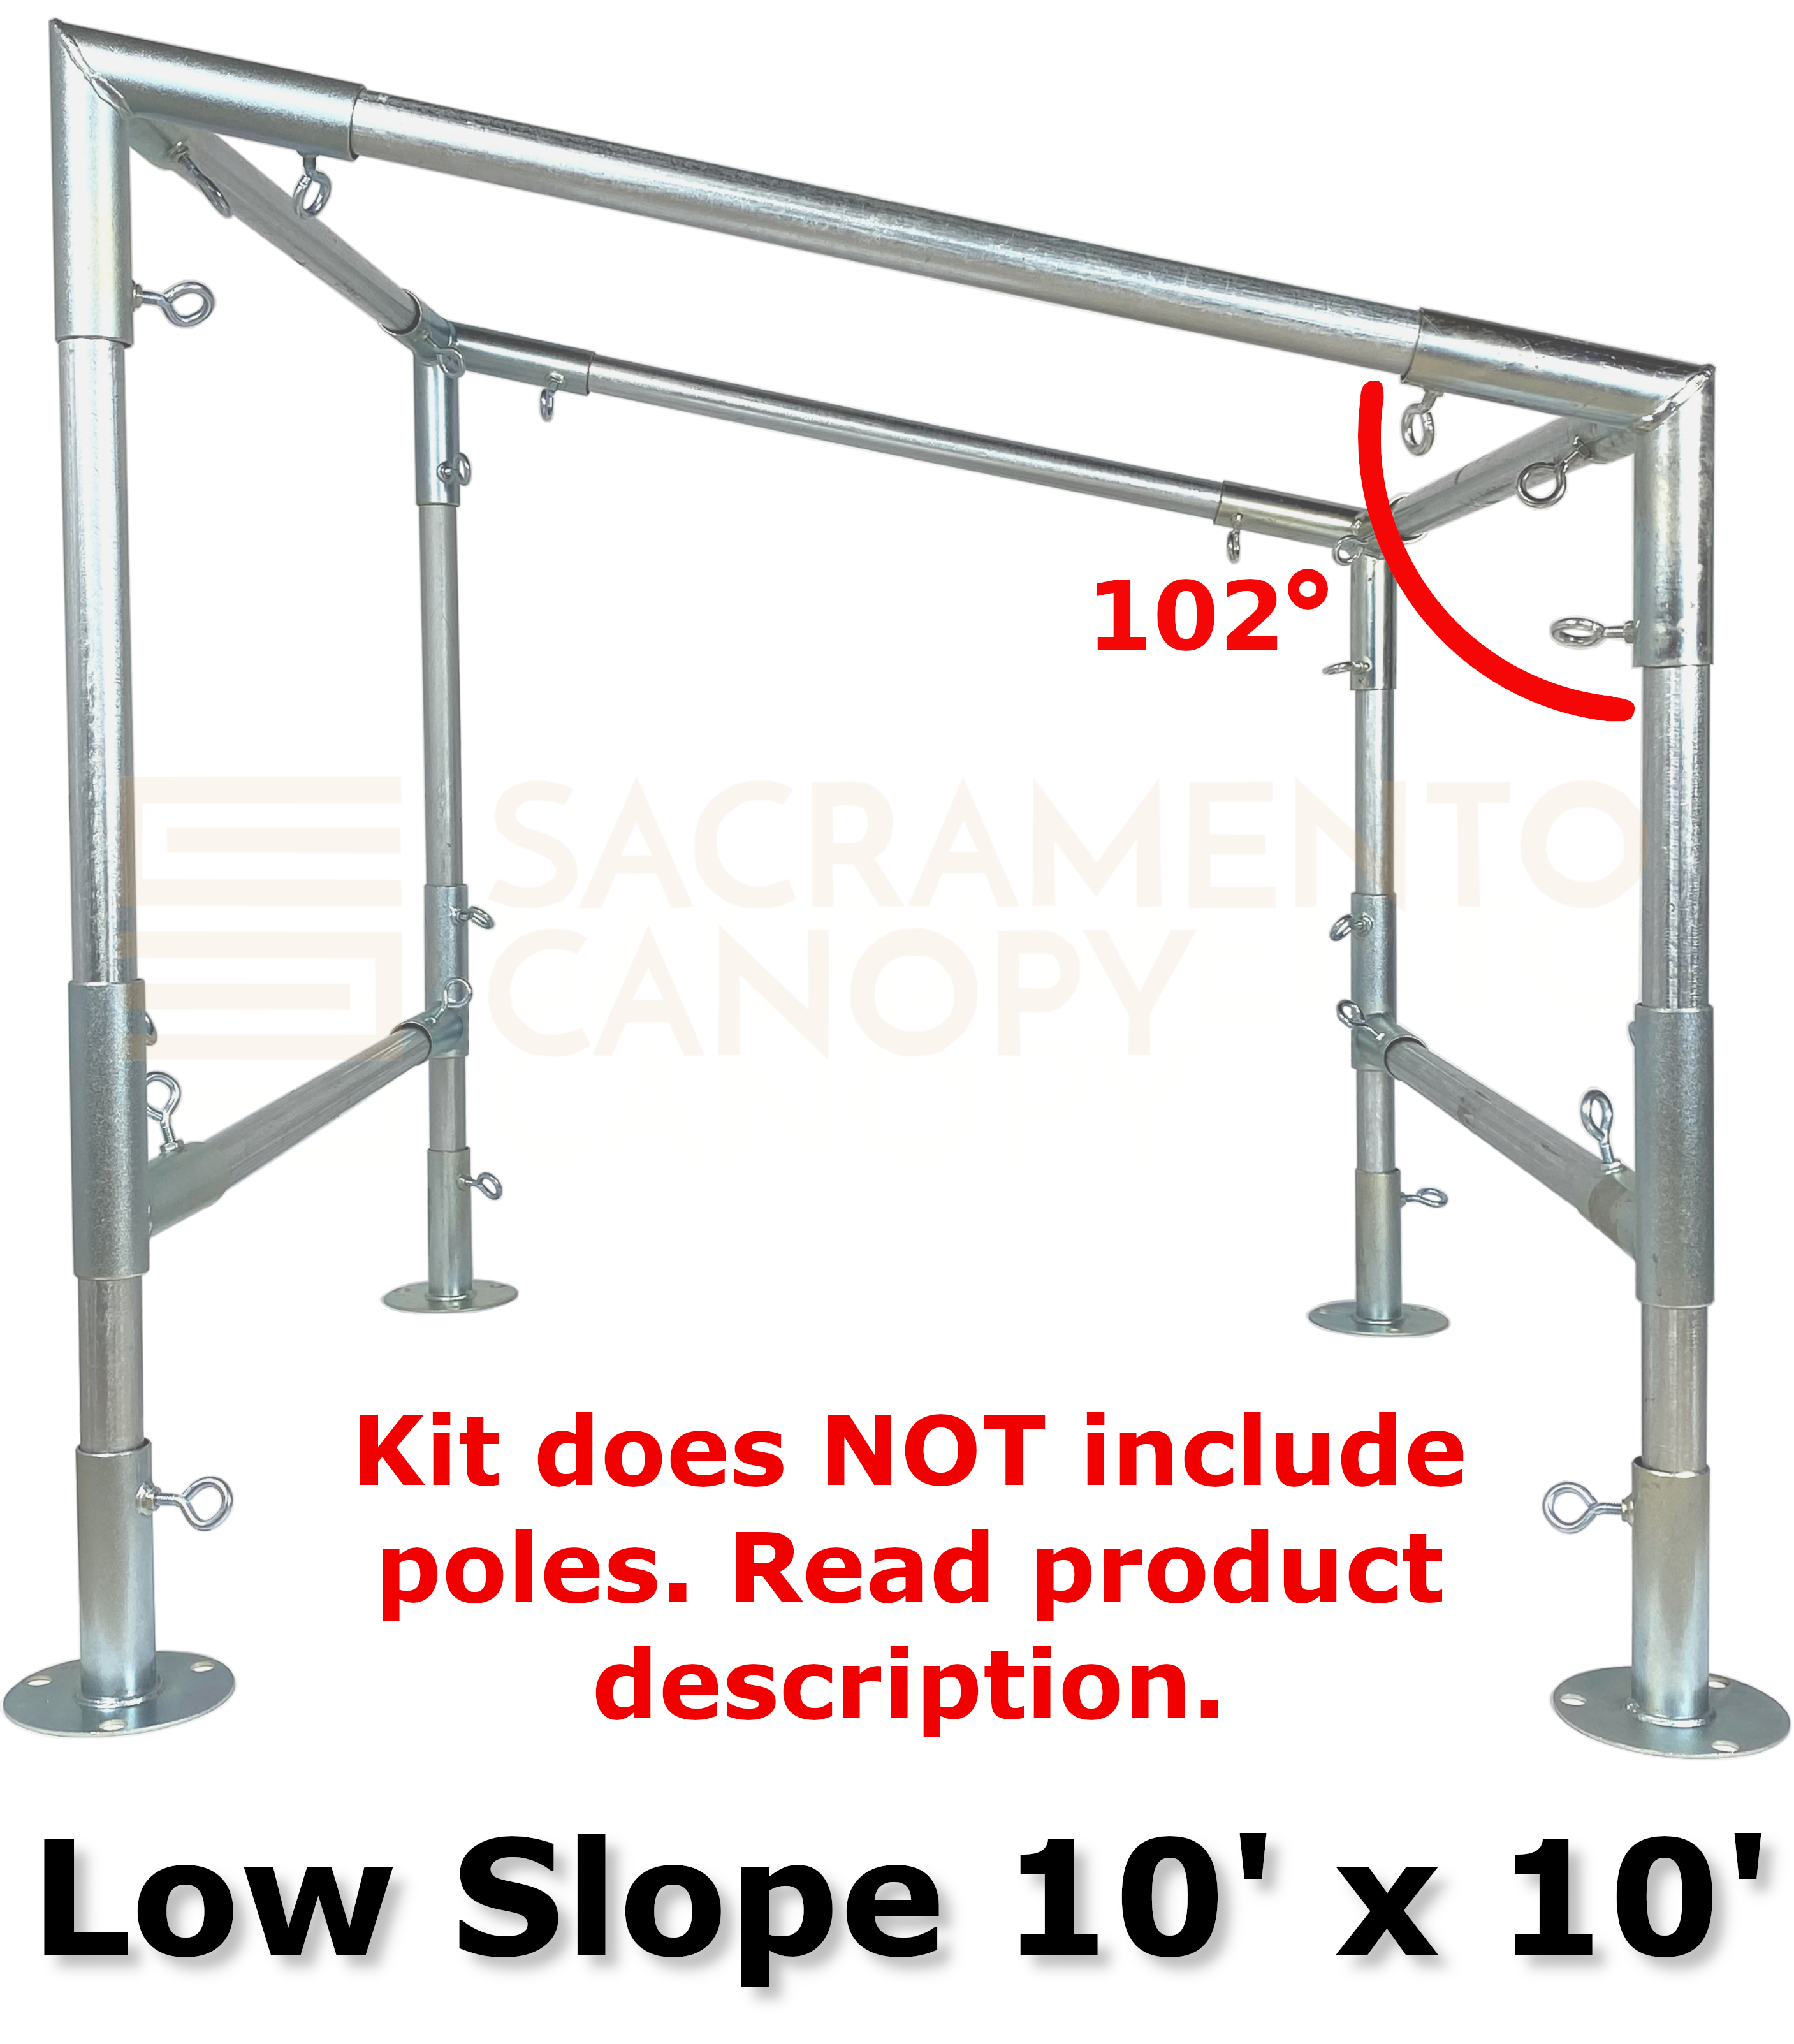 Slope Roof Canopy Fittings Kits (10' Wide) DIY Greenhouse, RV & Boat Carport, Shelter, Shade Structure, Vendor Booth, Tent, Steel Frame EMT Connector Parts, 1" - image 2 of 22